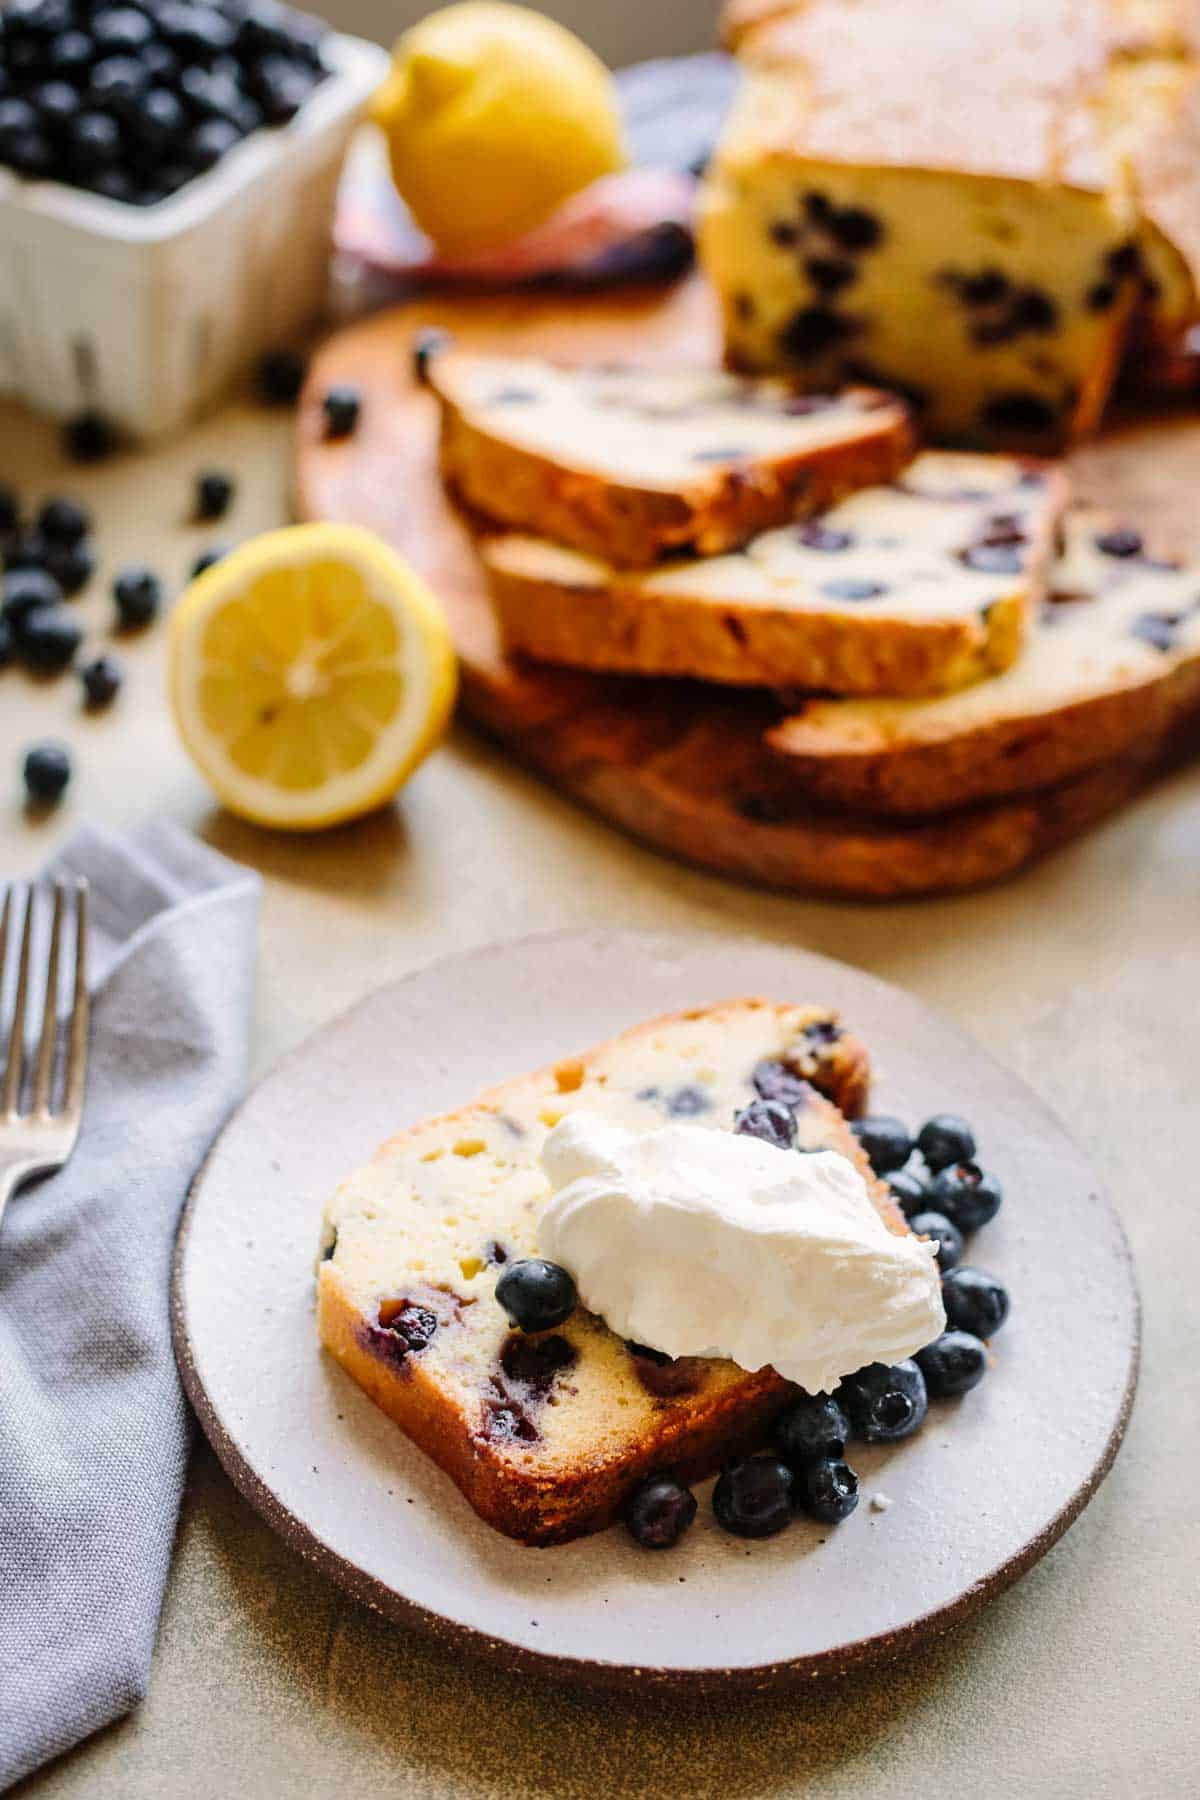 Slice of blueberry lemon pound cake with fresh blueberries and whipped cream on a dessert plate.